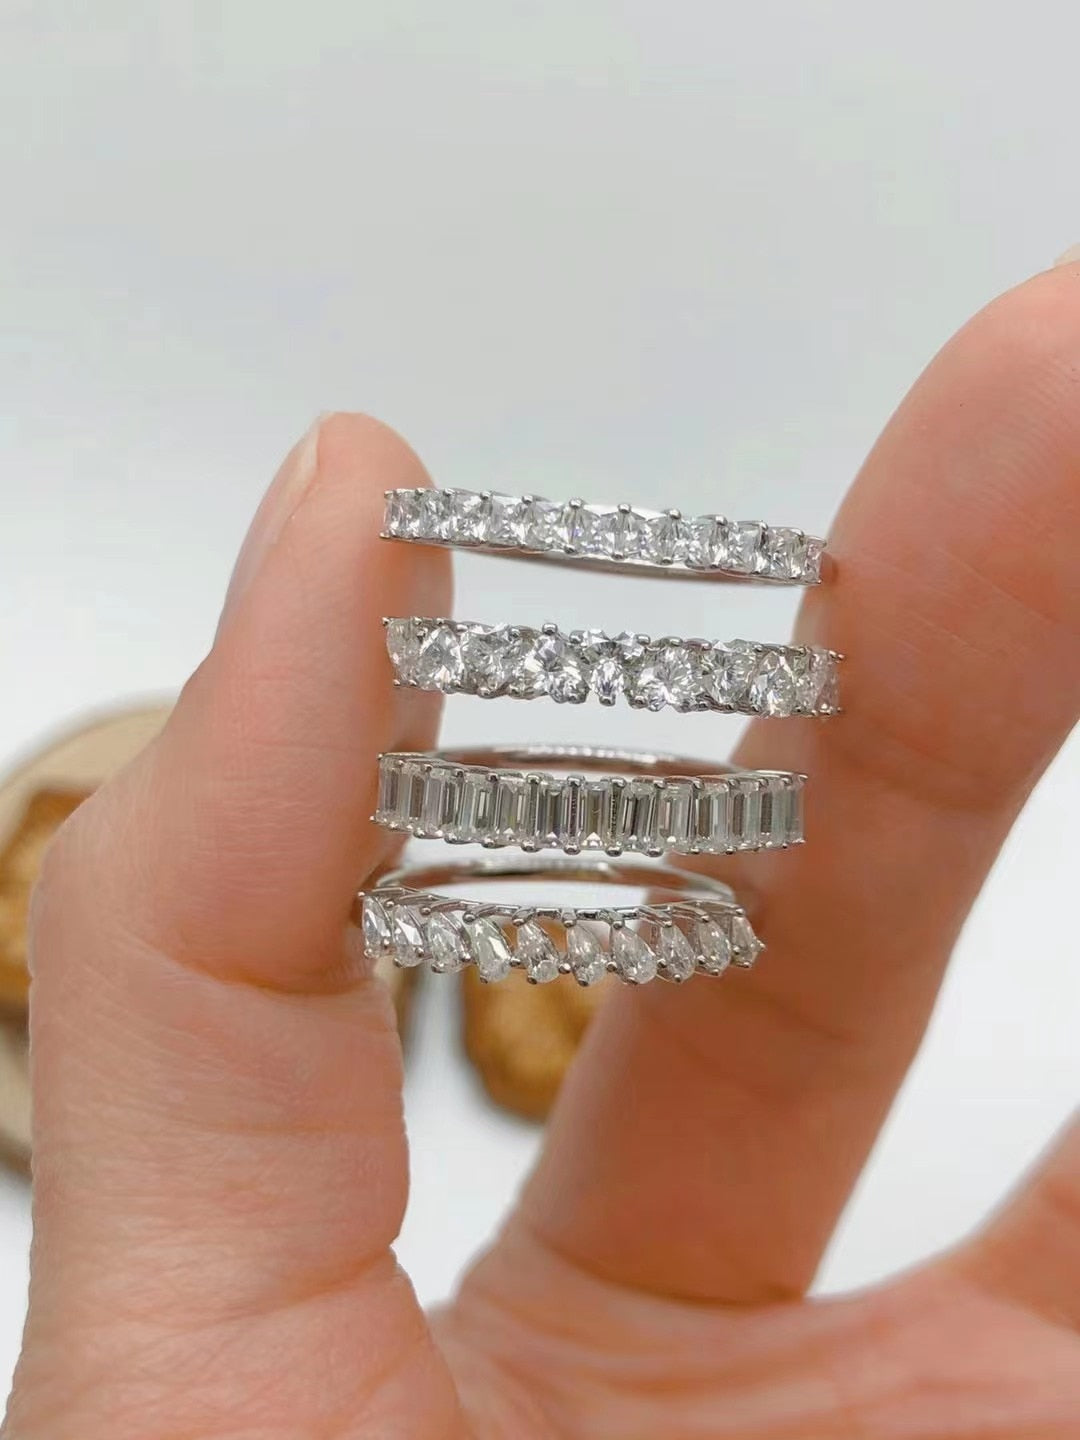 A hand holding 4 silver wedding rings set with several small princess, heart, tear drop and emerald cut moissanites.